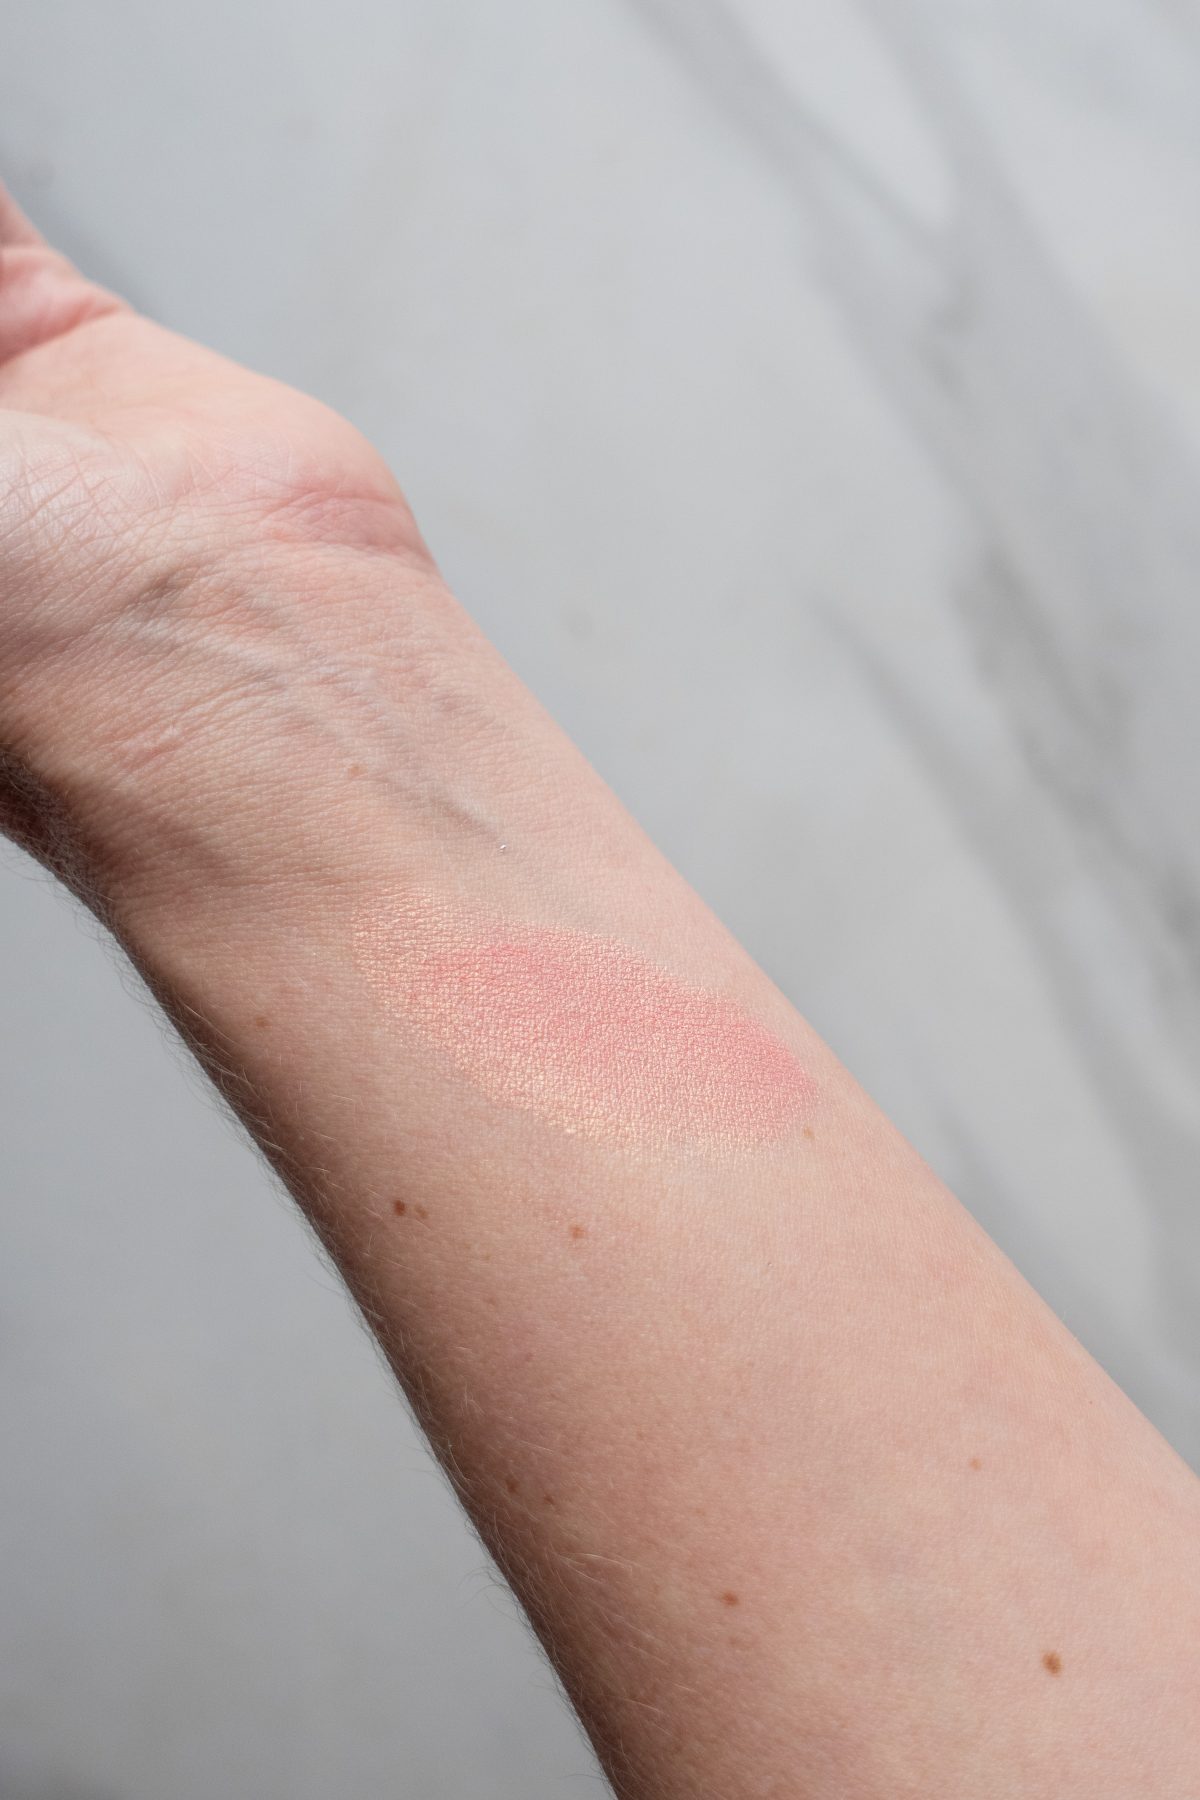 Milani Baked Blush Review and Swatches - Bella Bellini Swatch